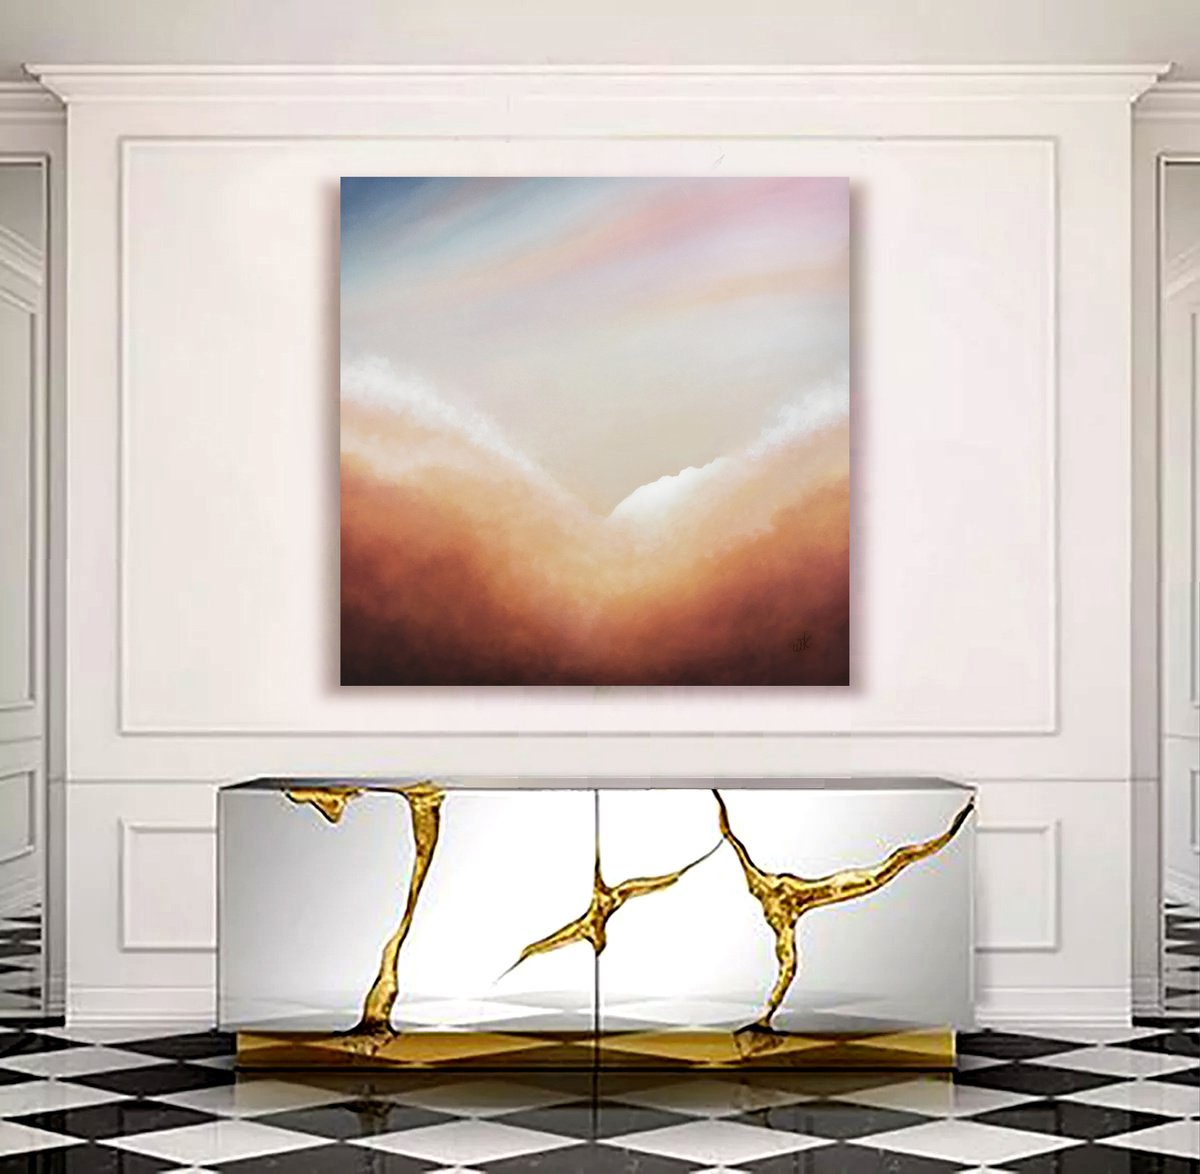 Large Abstract Landscape 02 - Oil Painting on Canvas 100×100 cm